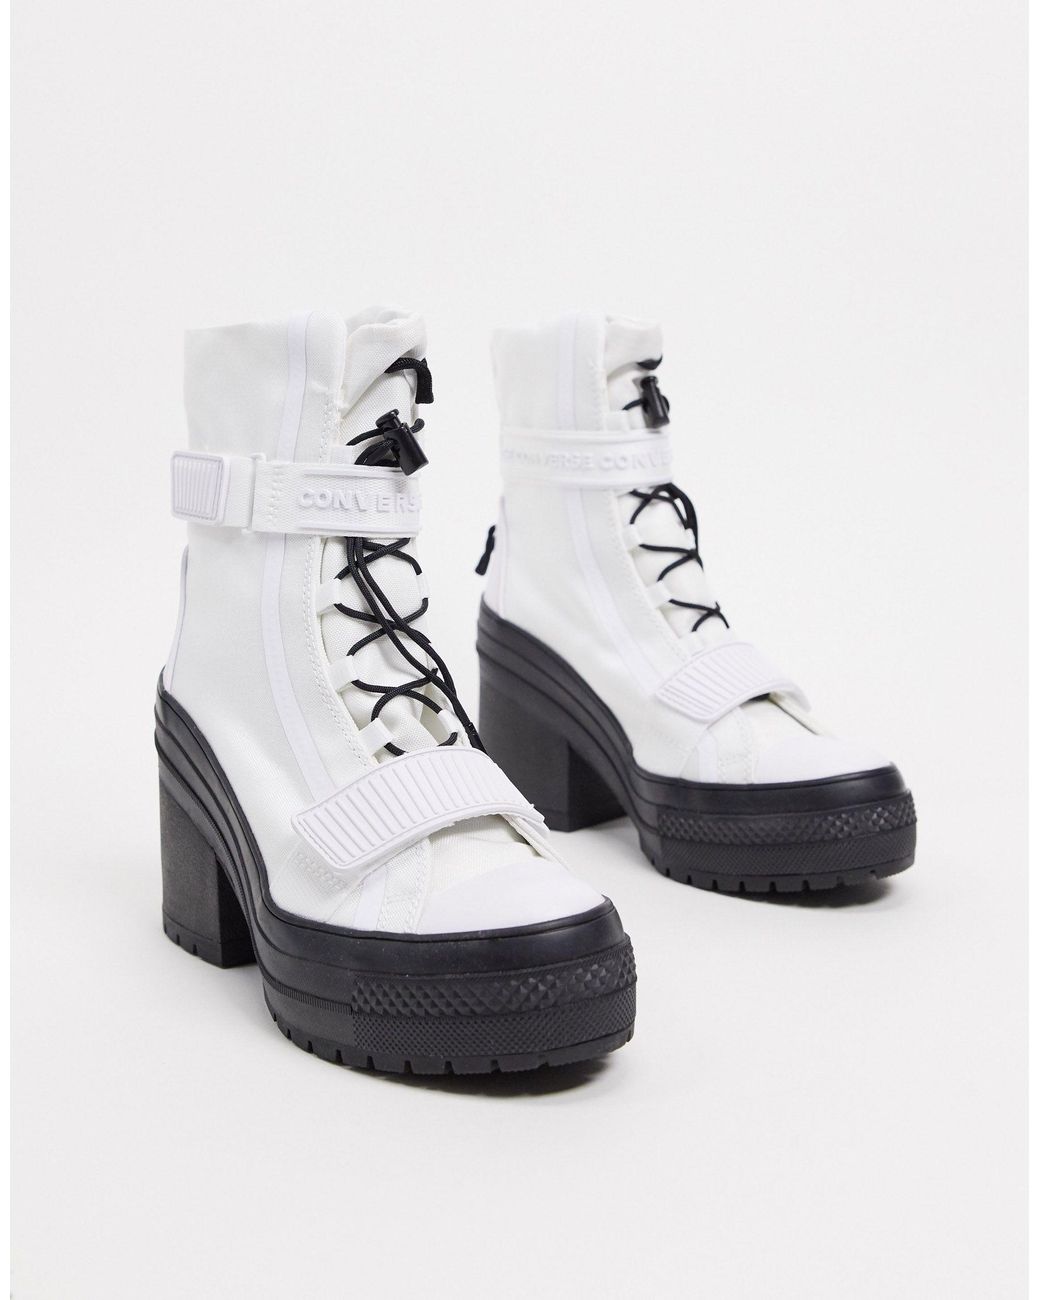 Converse Chuck Taylor All Star Gr82 Heeled Boot in White | Lyst